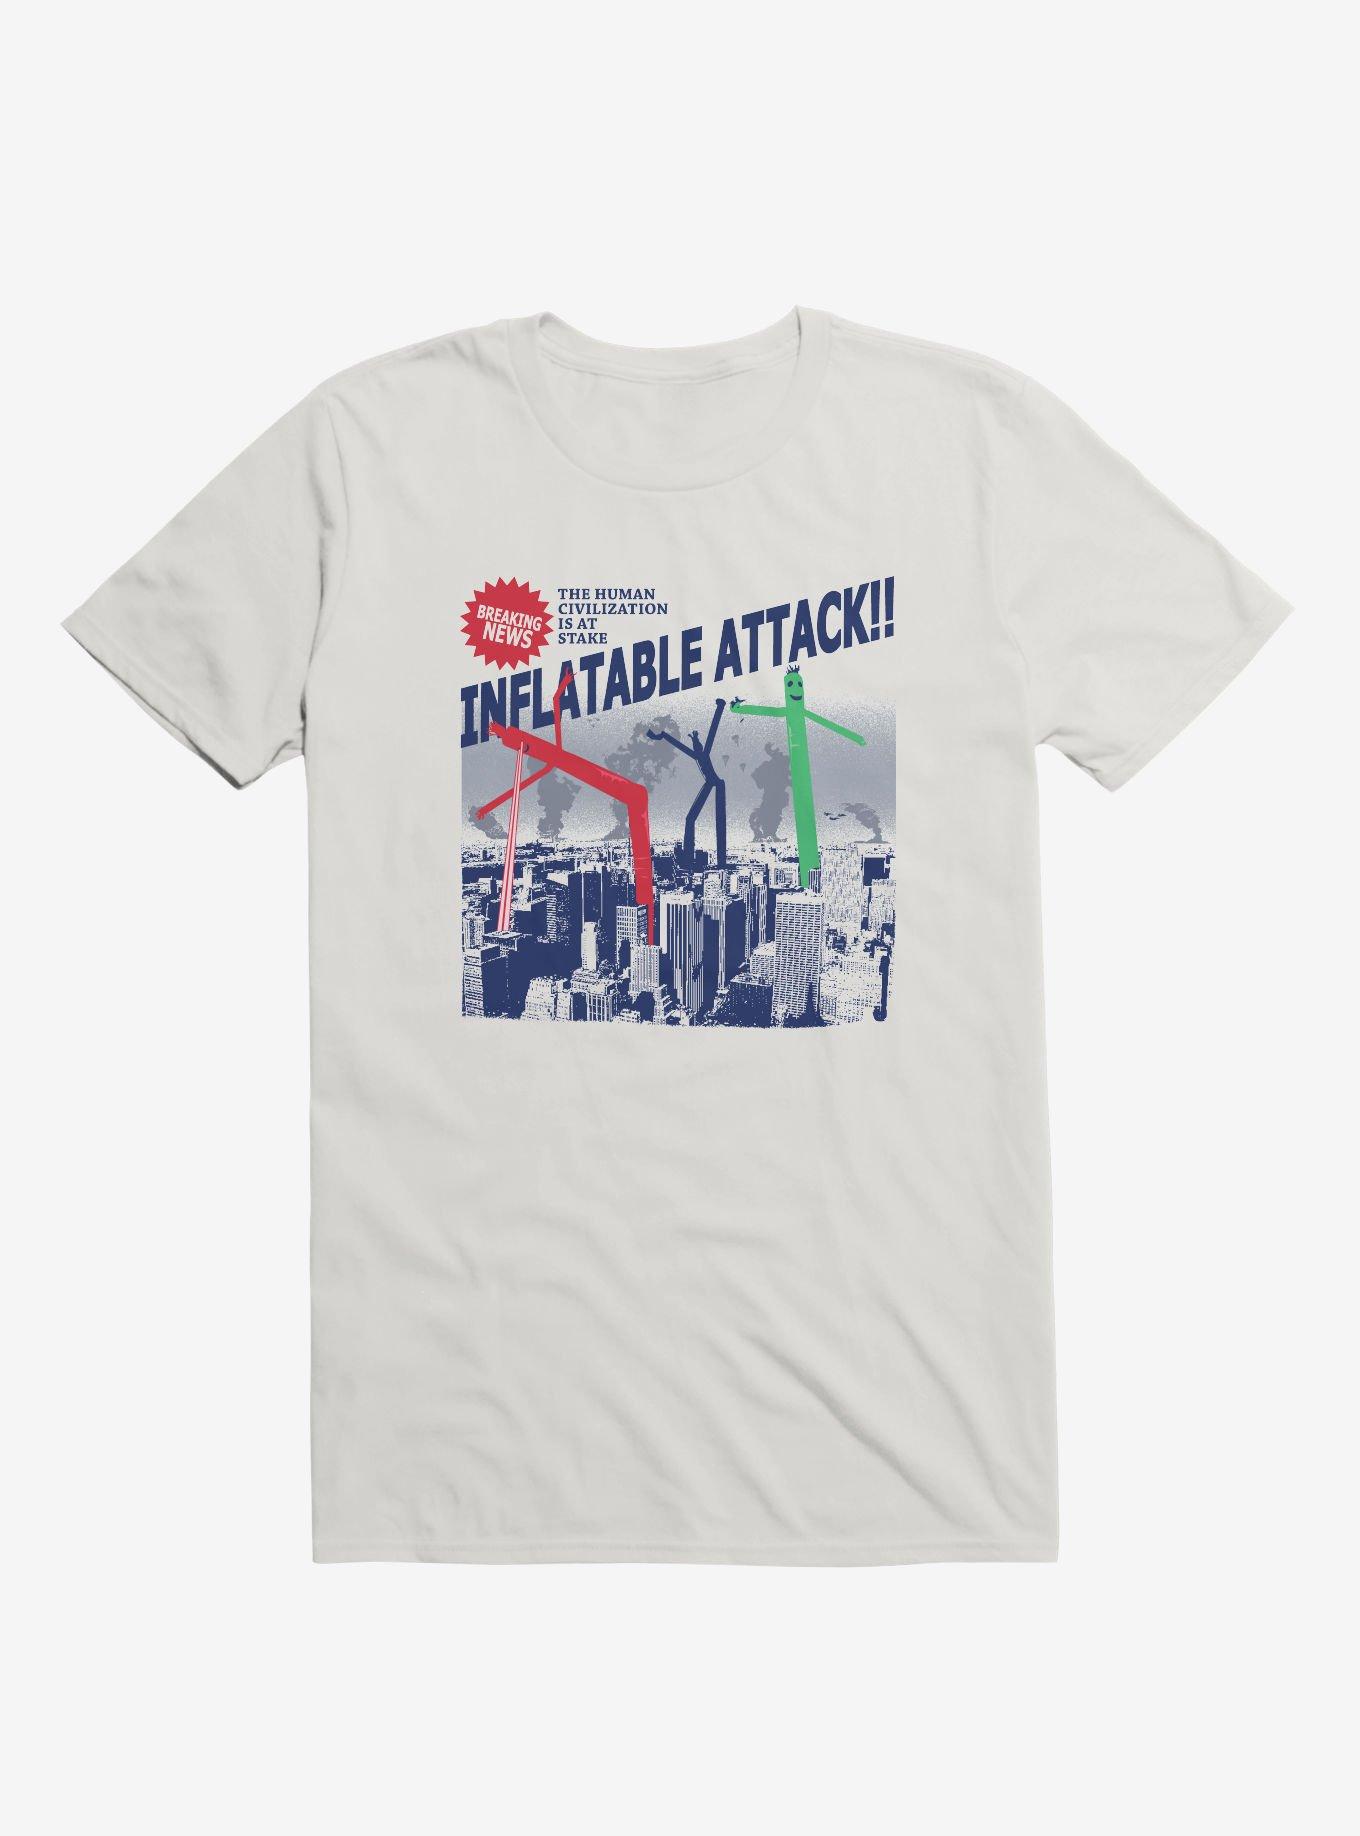 Inflatable Attack T-Shirt